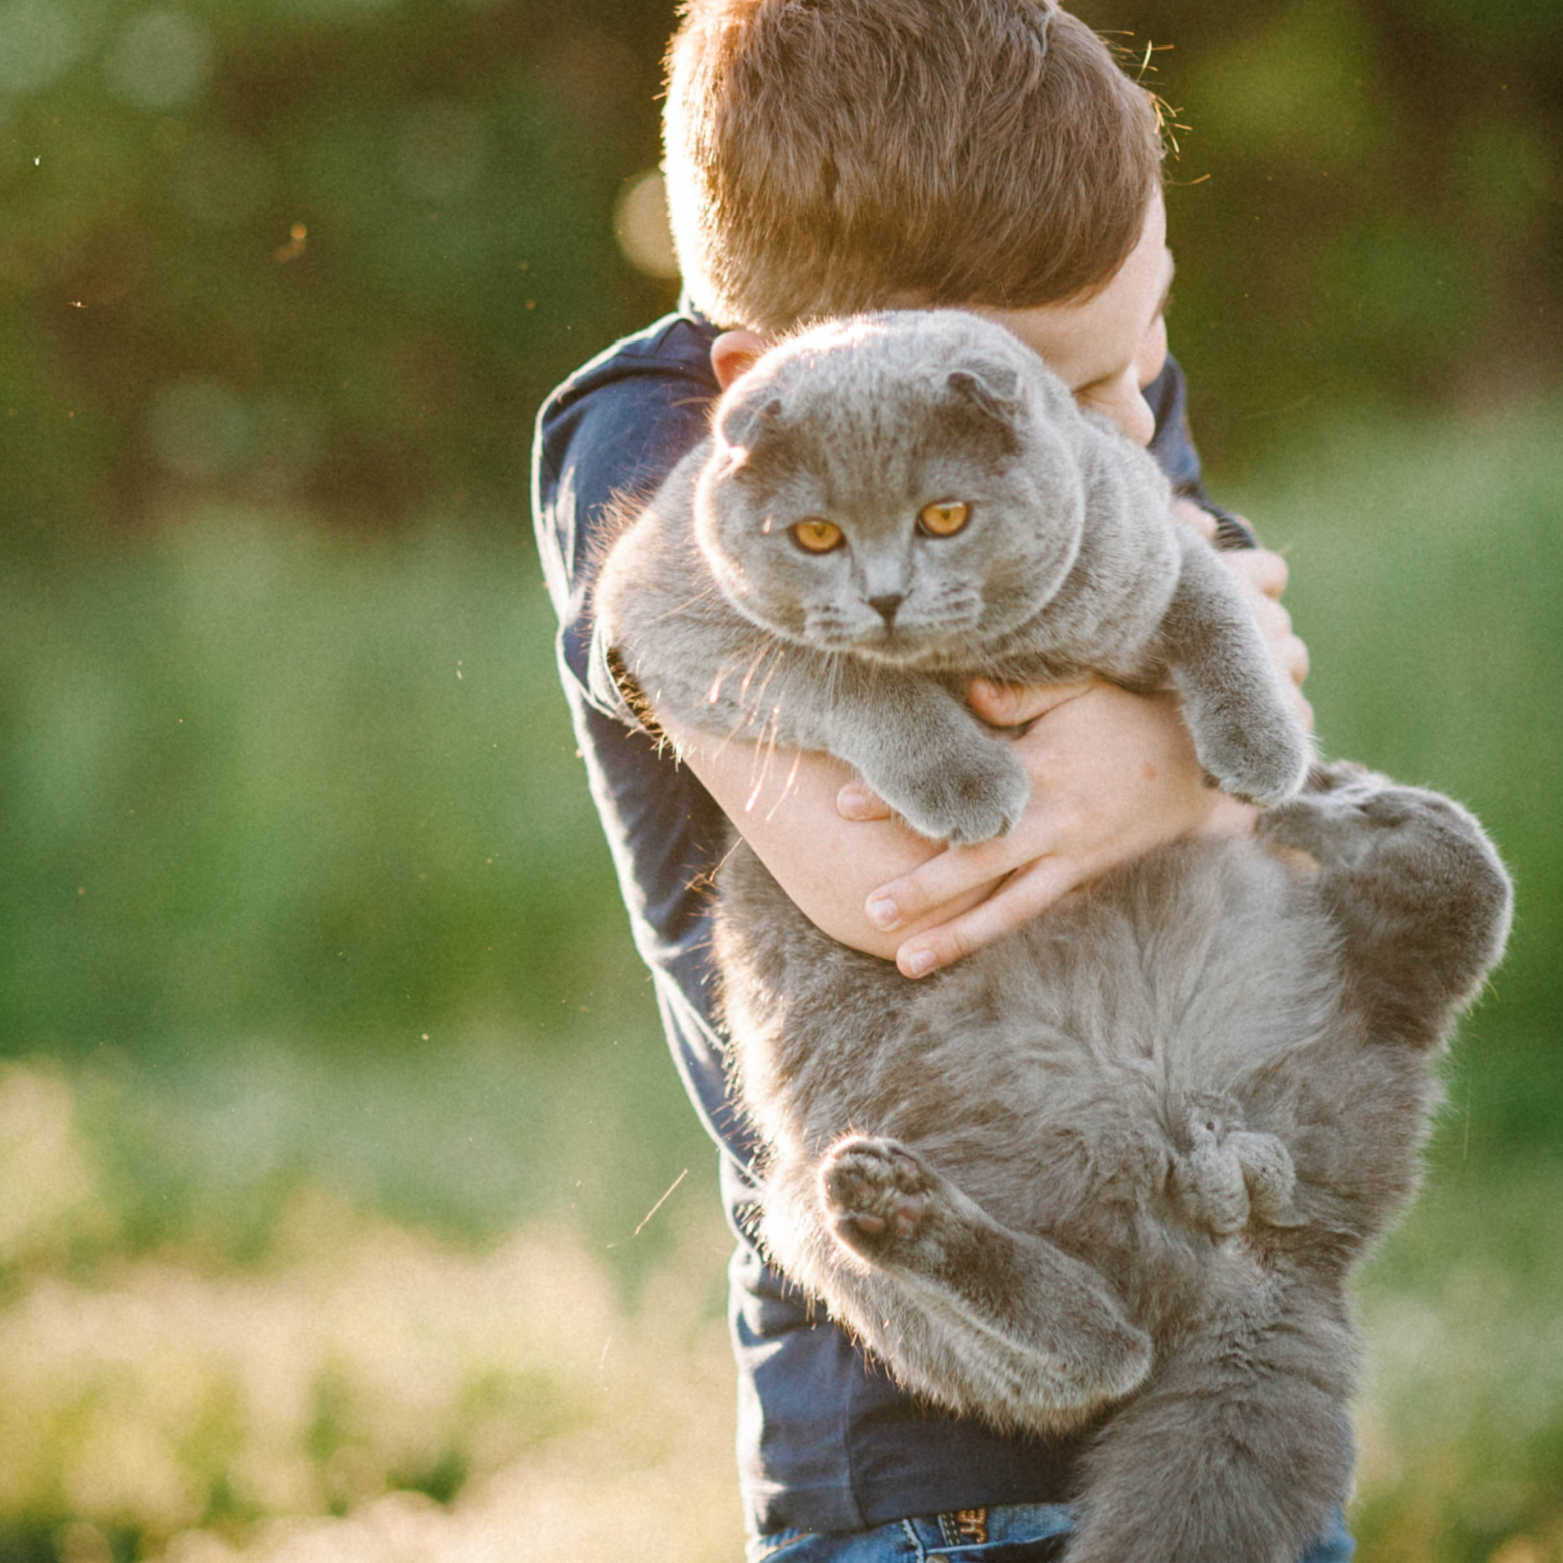 A boy holding his older pet. Text discusses the potential benefits of CBD for pets, including reducing anxiety, pain, seizures, and appetite/nausea issues. Studies referenced include ones from 2019, 2018, 2017, and 2020.